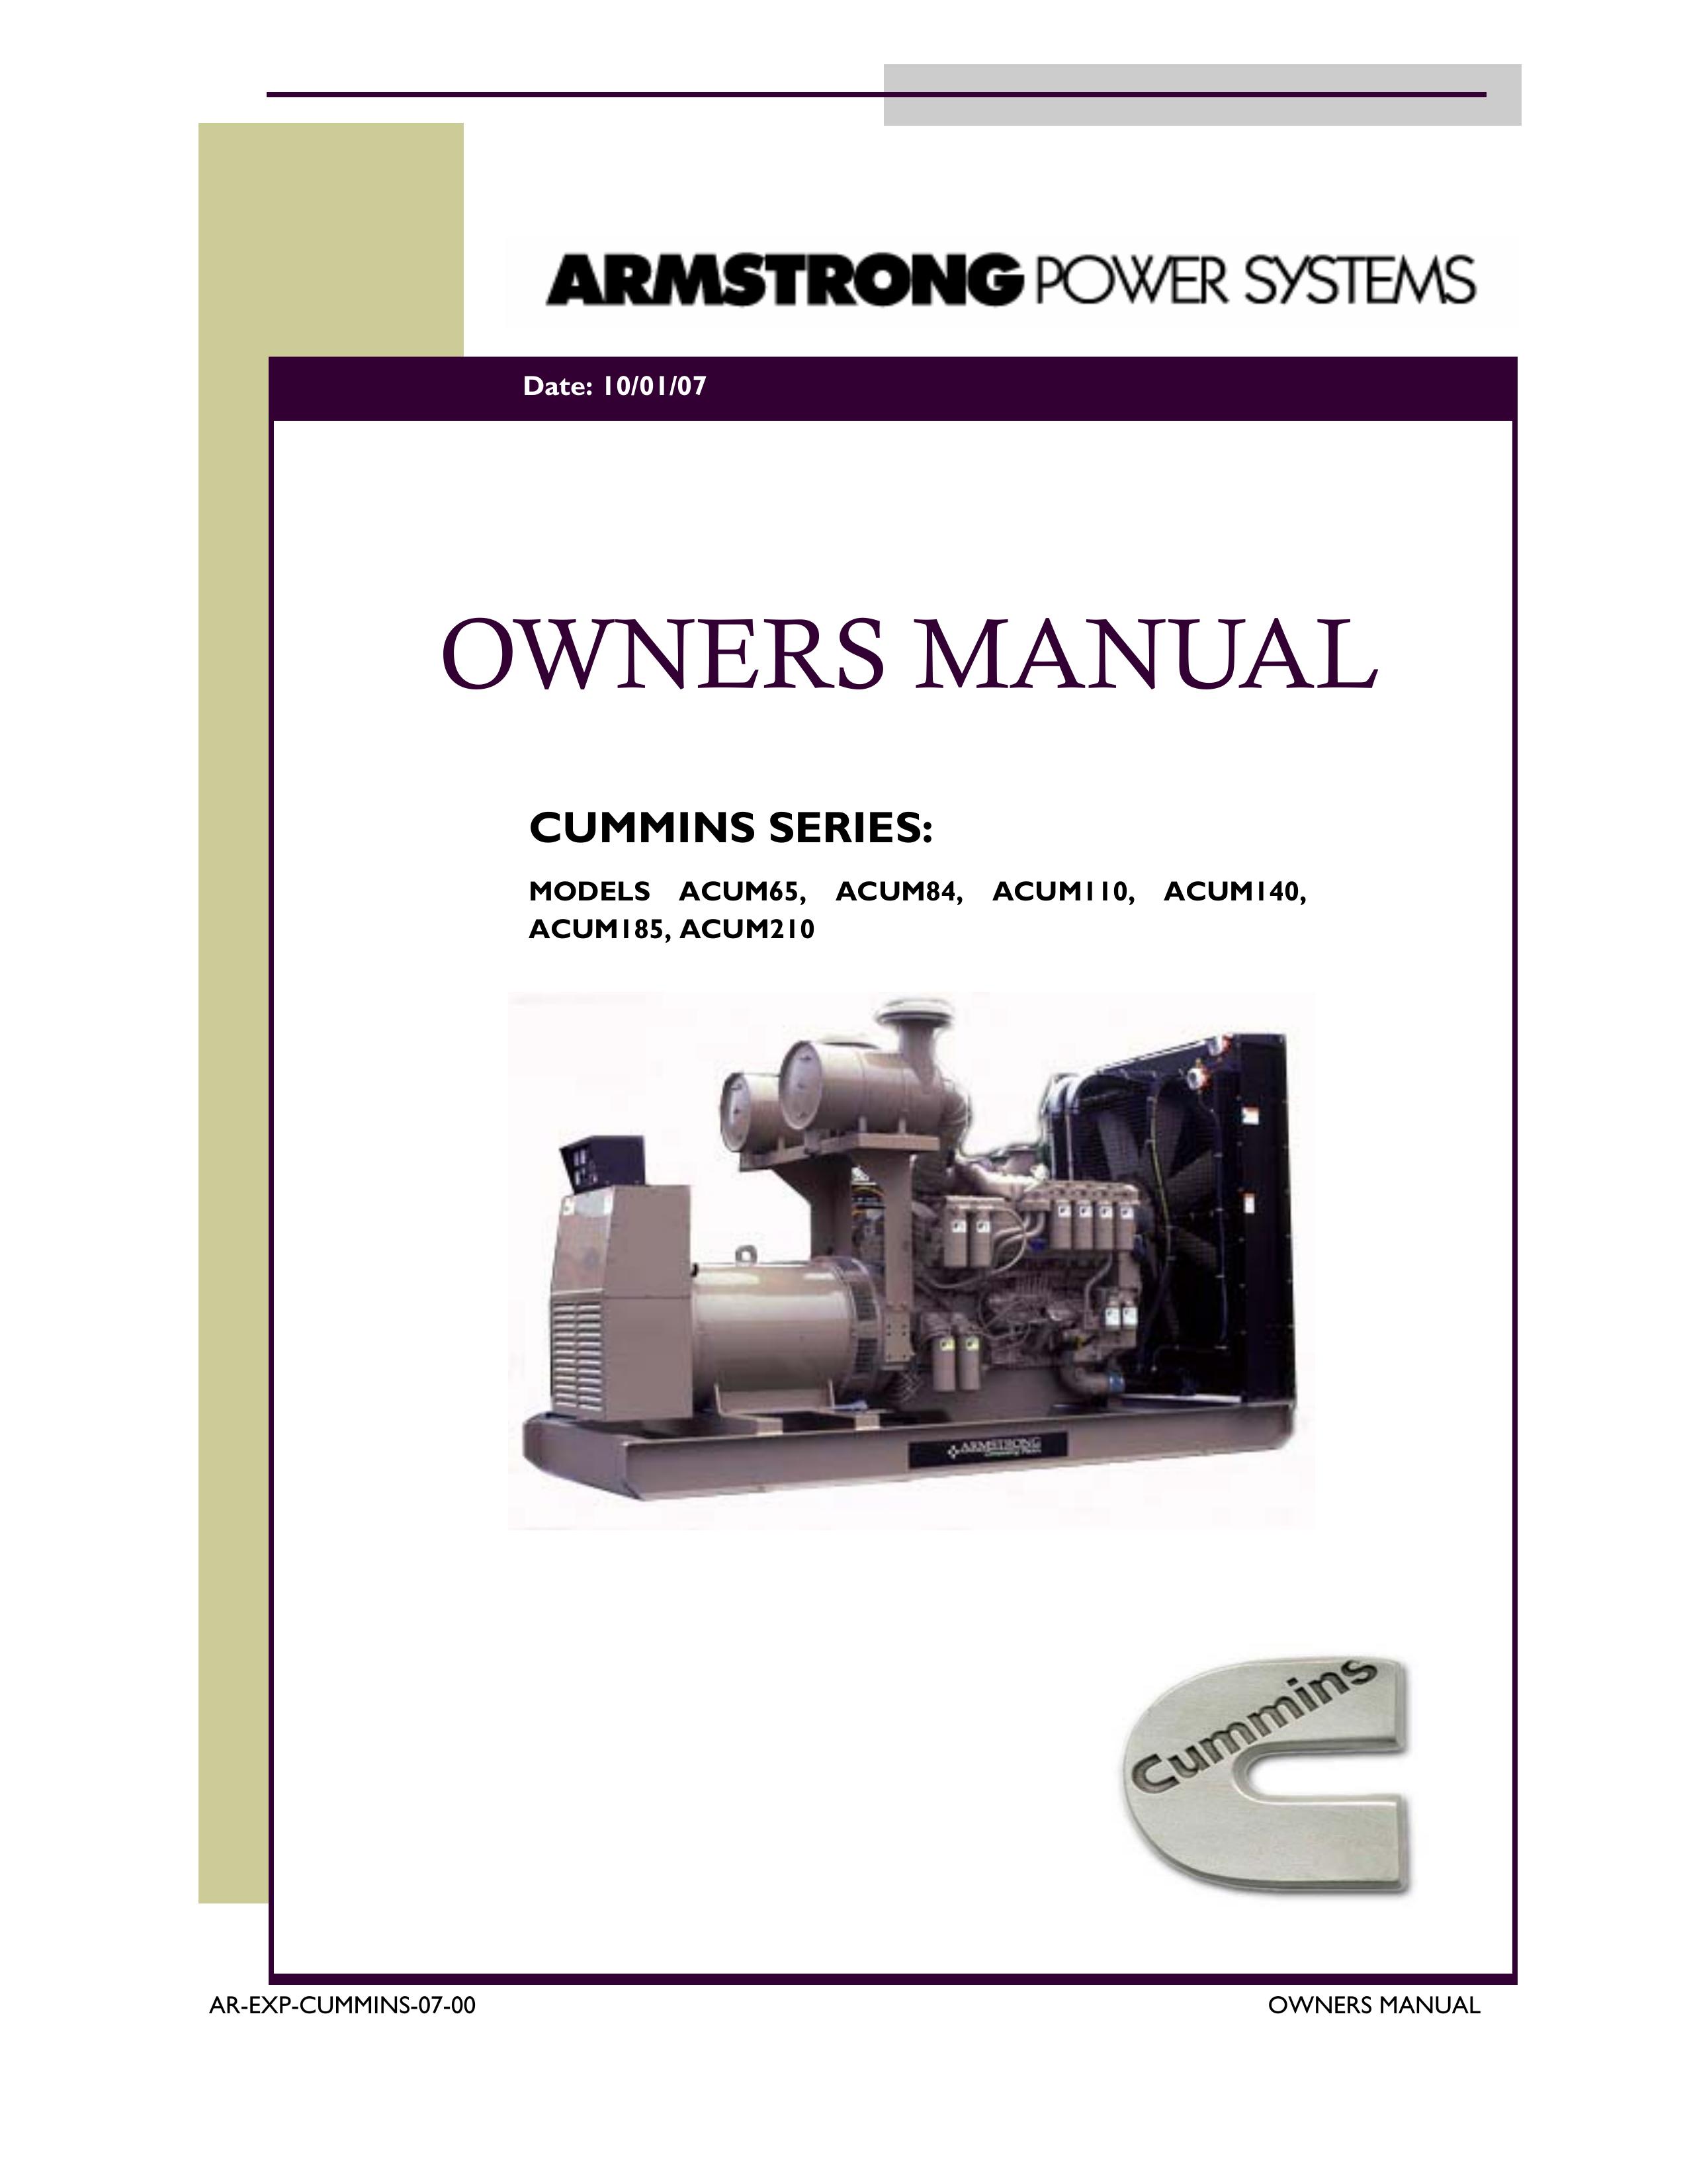 Armstrong World Industries ACUM140 Portable Generator User Manual